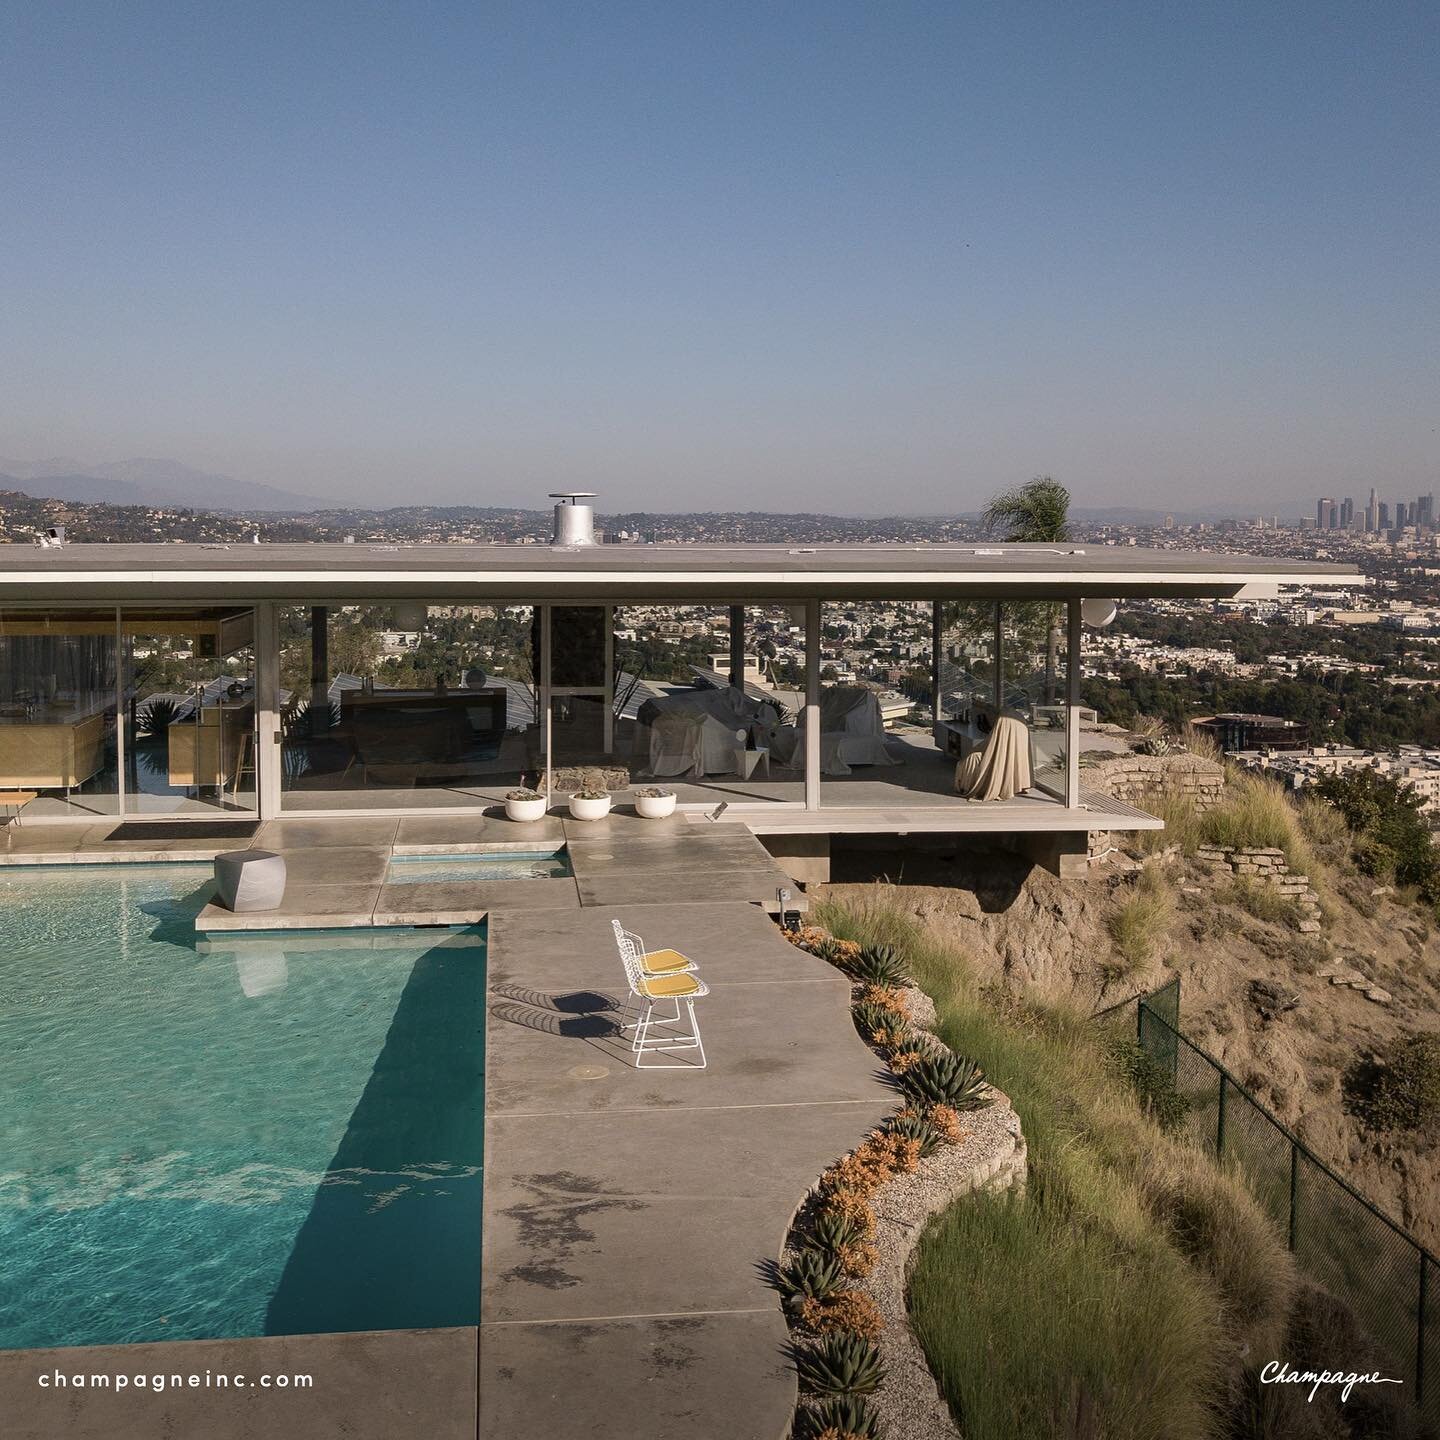 The Stahl House is a famous modernist styled house in the Hollywood Hills and is listed as one of the top 150 structures on &quot;America's Favorite Architecture&quot; list
Follow @champagnehelps for all things real estate
-

#champagne #realestate #